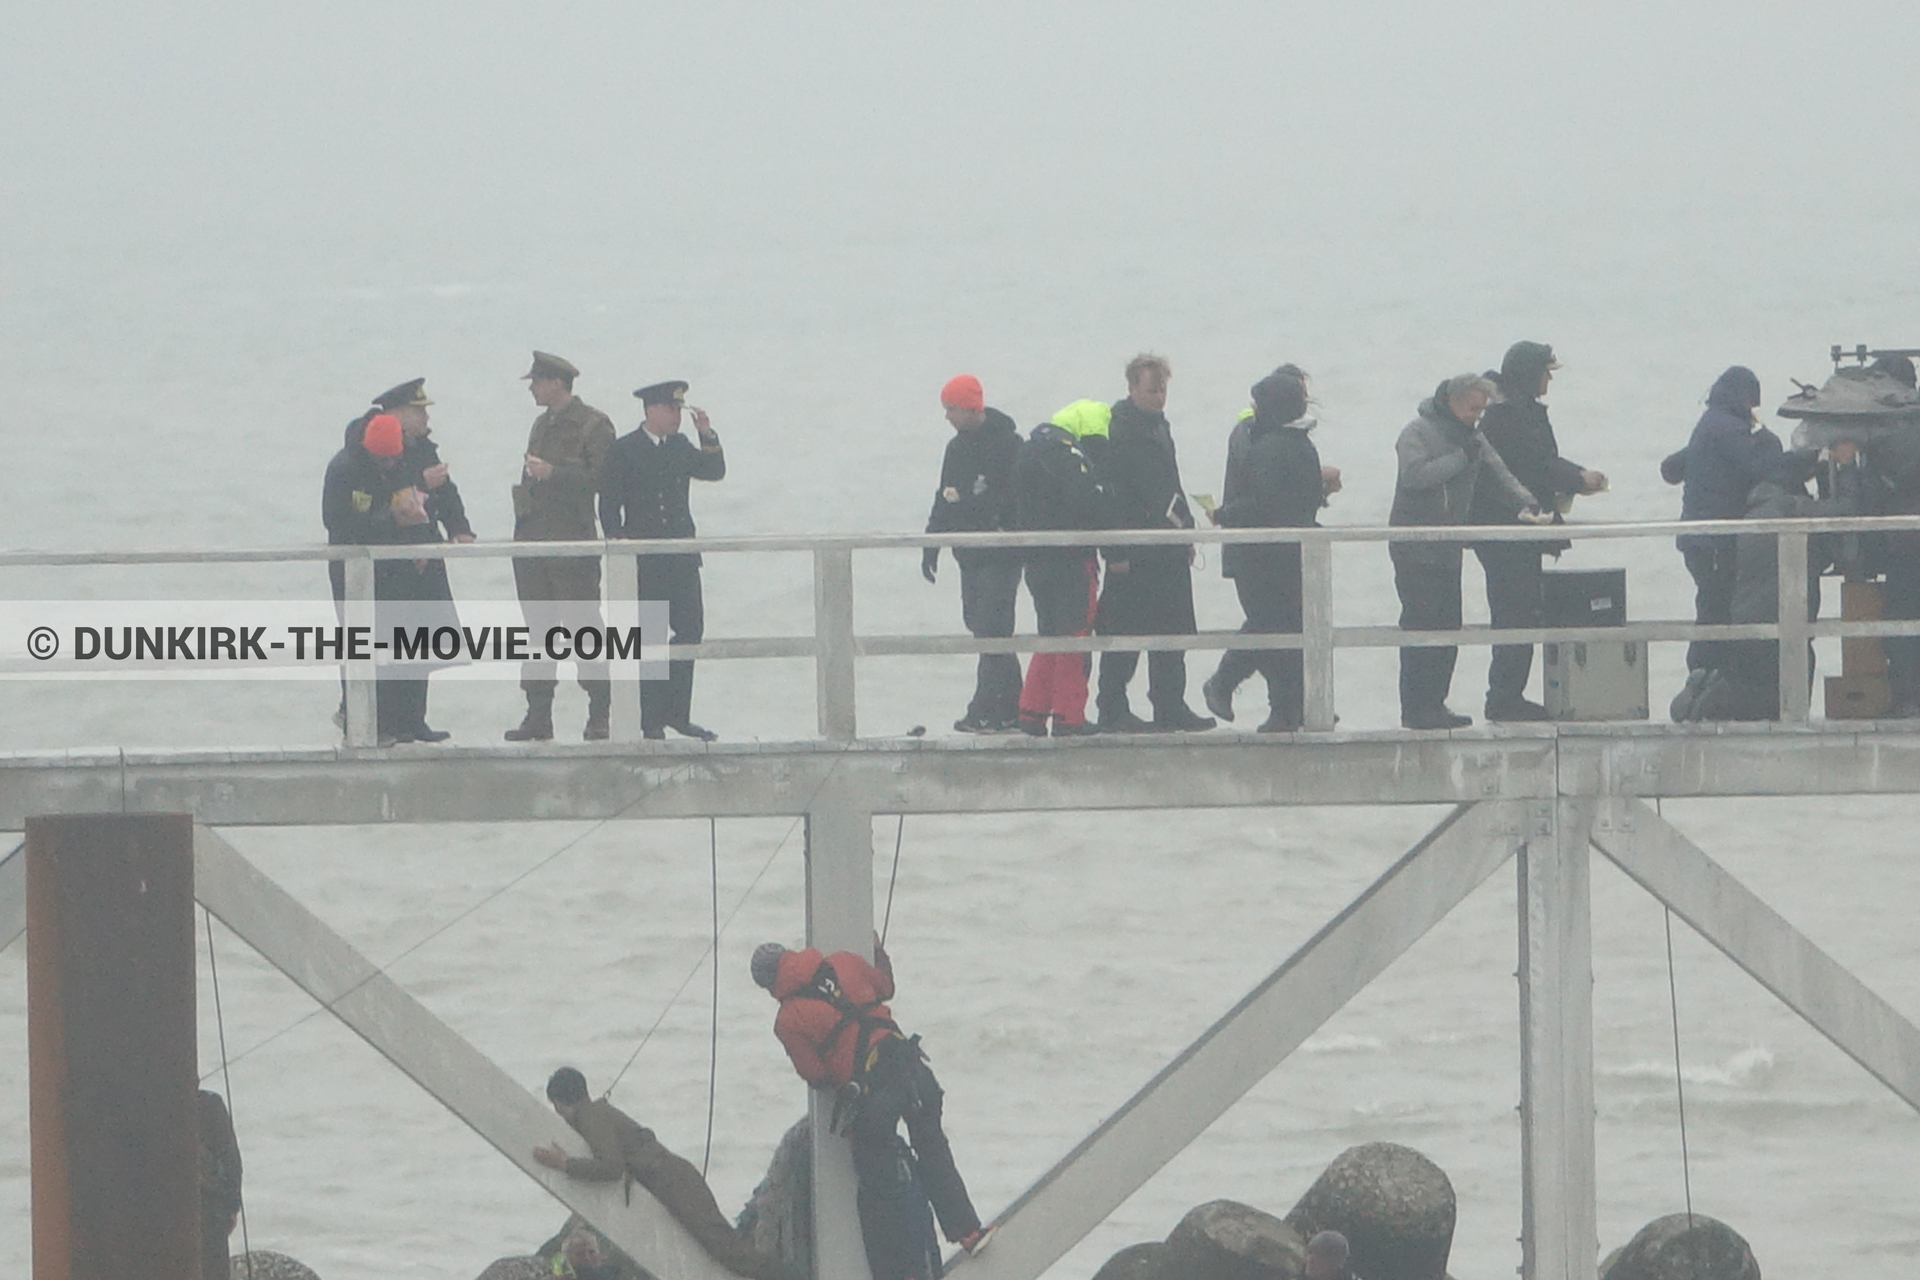 Picture with actor, grey sky, EST pier, Christopher Nolan, technical team,  from behind the scene of the Dunkirk movie by Nolan